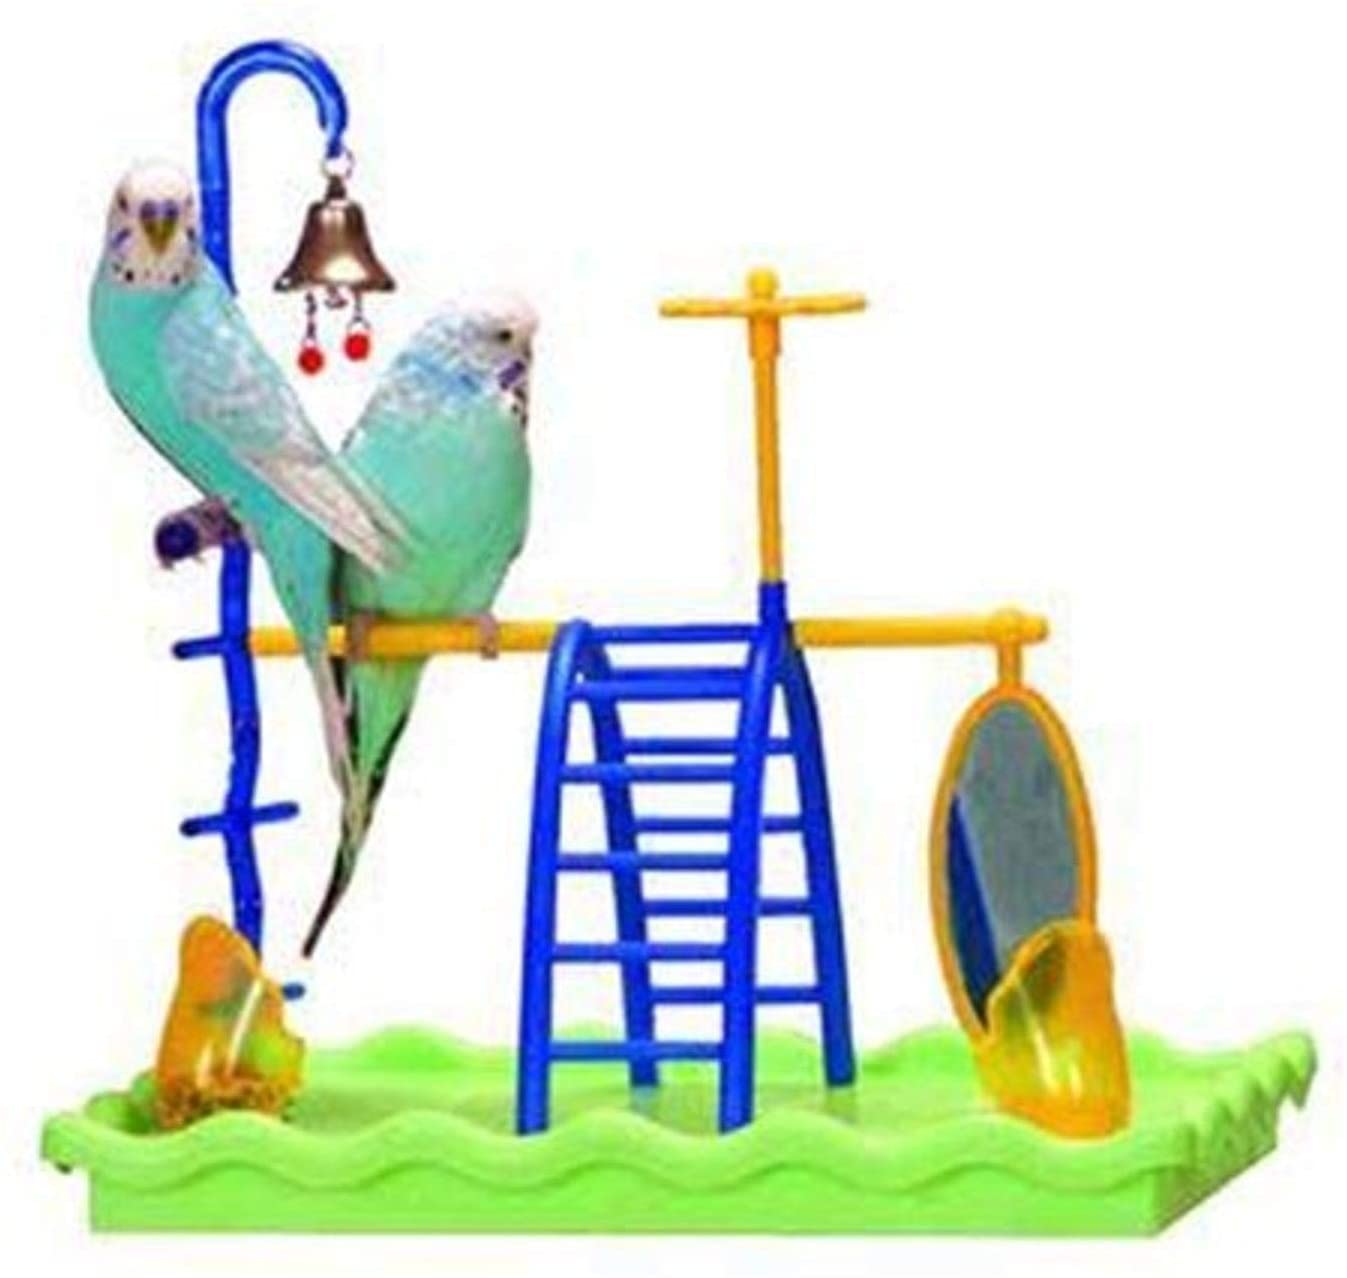 PET MATE JW ACTIVITOY PLAY GYM